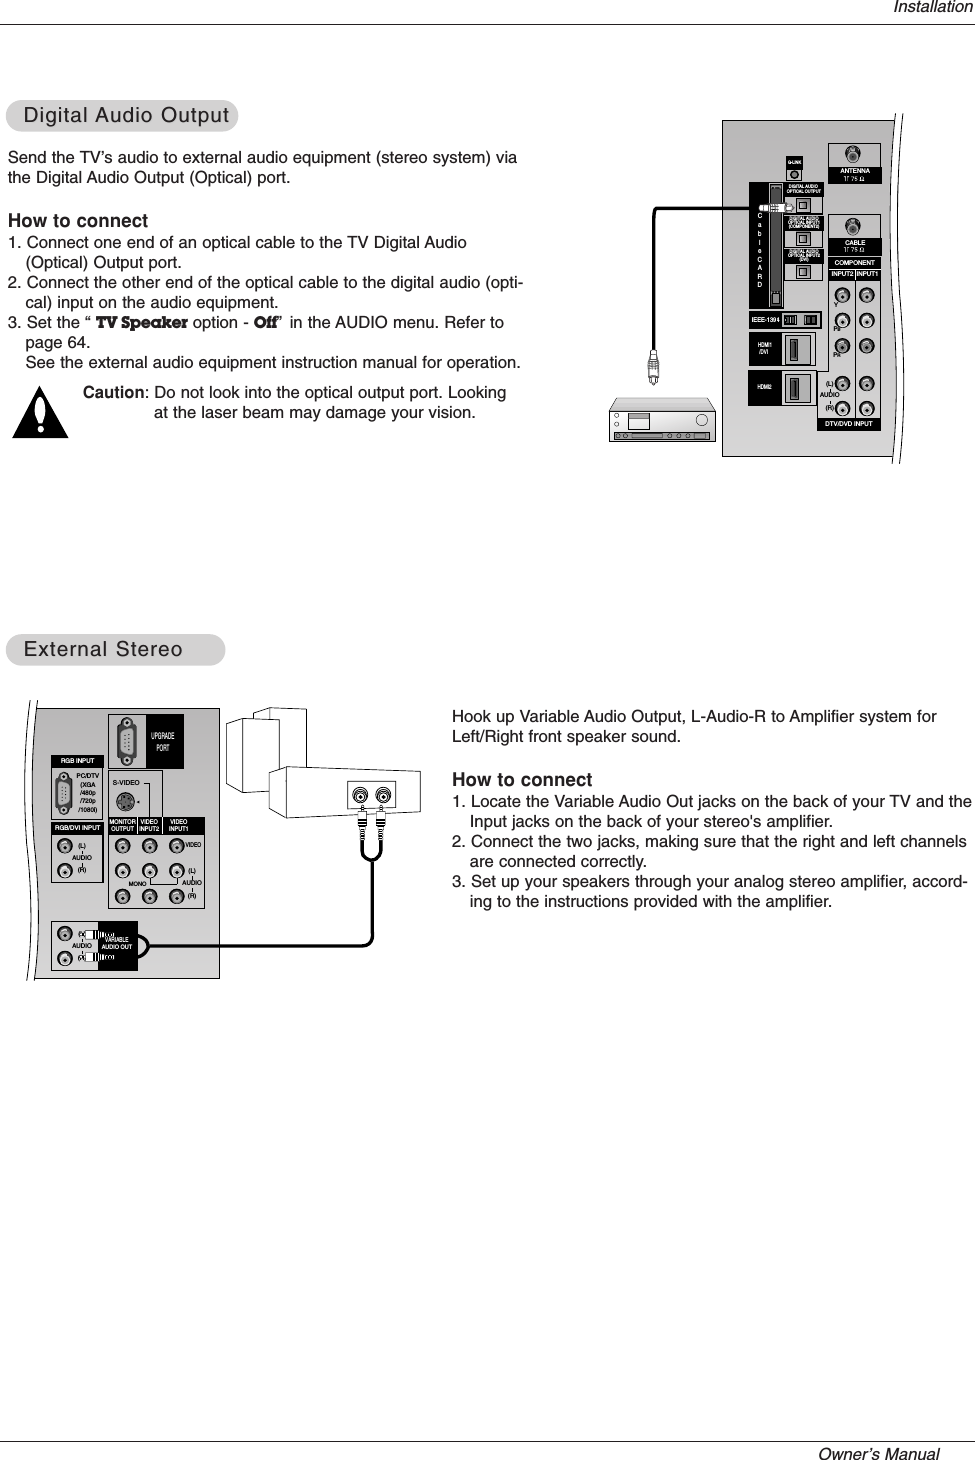 Owner’s Manual   InstallationSend the TV’s audio to external audio equipment (stereo system) viathe Digital Audio Output (Optical) port.How to connect1. Connect one end of an optical cable to the TV Digital Audio(Optical) Output port.2. Connect the other end of the optical cable to the digital audio (opti-cal) input on the audio equipment.3. Set the “ TV Speaker option - Off”in the AUDIO menu. Refer topage 64.See the external audio equipment instruction manual for operation.Caution: Do not look into the optical output port. Lookingat the laser beam may damage your vision.Digital Digital Audio OutputAudio OutputPR PBYCABLECOMPONENTINPUT2 INPUT1DTV/DVD INPUT(L)(R)AUDIOANTENNADIGITAL AUDIOOPTICAL INPUT1(COMPONENT2)DIGITAL AUDIOOPTICAL INPUT2(DVI)IEEE-1394DIGITAL AUDIO OPTICAL OUTPUTCABLECARD DVI G-LINK HDMI HDMI1/DVI  HDMI2CableCARDHook up Variable Audio Output, L-Audio-R to Amplifier system forLeft/Right front speaker sound.How to connect1. Locate the Variable Audio Out jacks on the back of your TV and theInput jacks on the back of your stereo&apos;s amplifier.2. Connect the two jacks, making sure that the right and left channelsare connected correctly.3. Set up your speakers through your analog stereo amplifier, accord-ing to the instructions provided with the amplifier.External StereoExternal StereoPC/DTV(XGA/480p/720p/1080i)S-VIDEOMONORGB INPUTRGB/DVI INPUT(L)(R)AUDIO(L)(R)AUDIOVIDEO(L)(R)AUDIOMONITOROUTPUTVIDEOINPUT2VIDEOINPUT1VARIABLEAUDIO OUTUPGRADEPORT